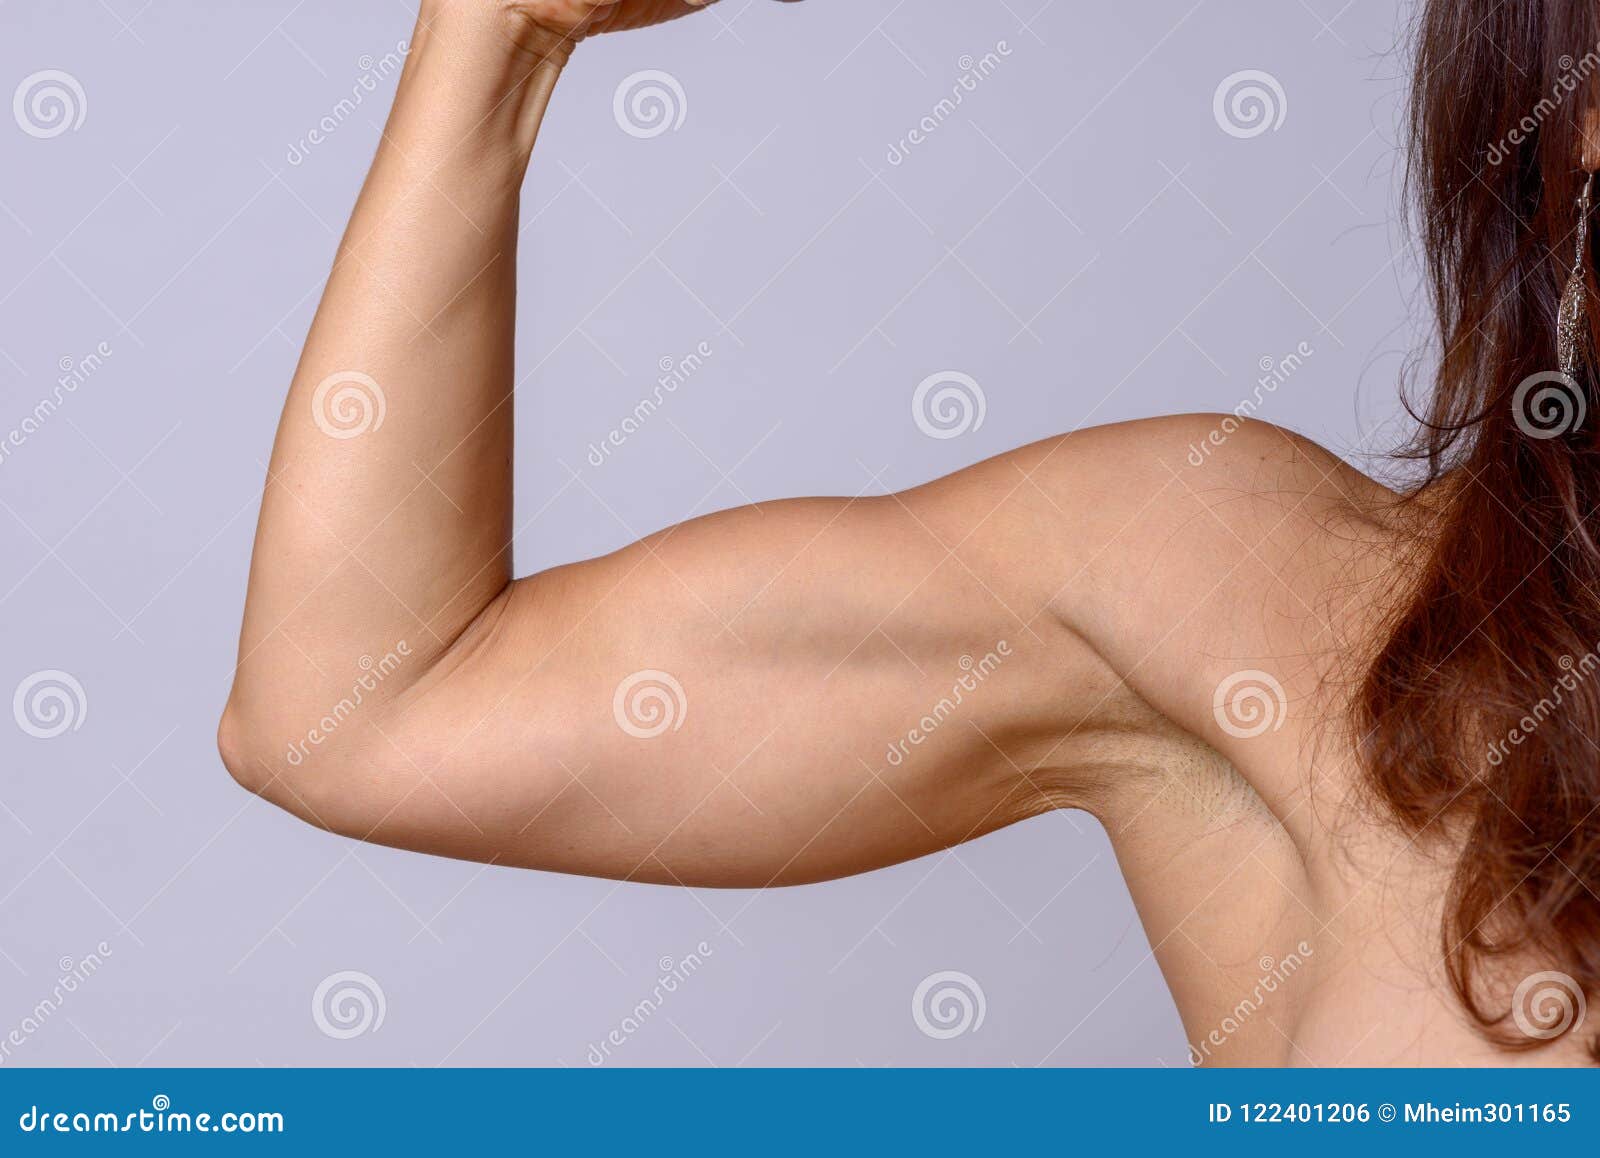 Fit Female Athlete Showcasing Toned Biceps In A Close-Up Shot